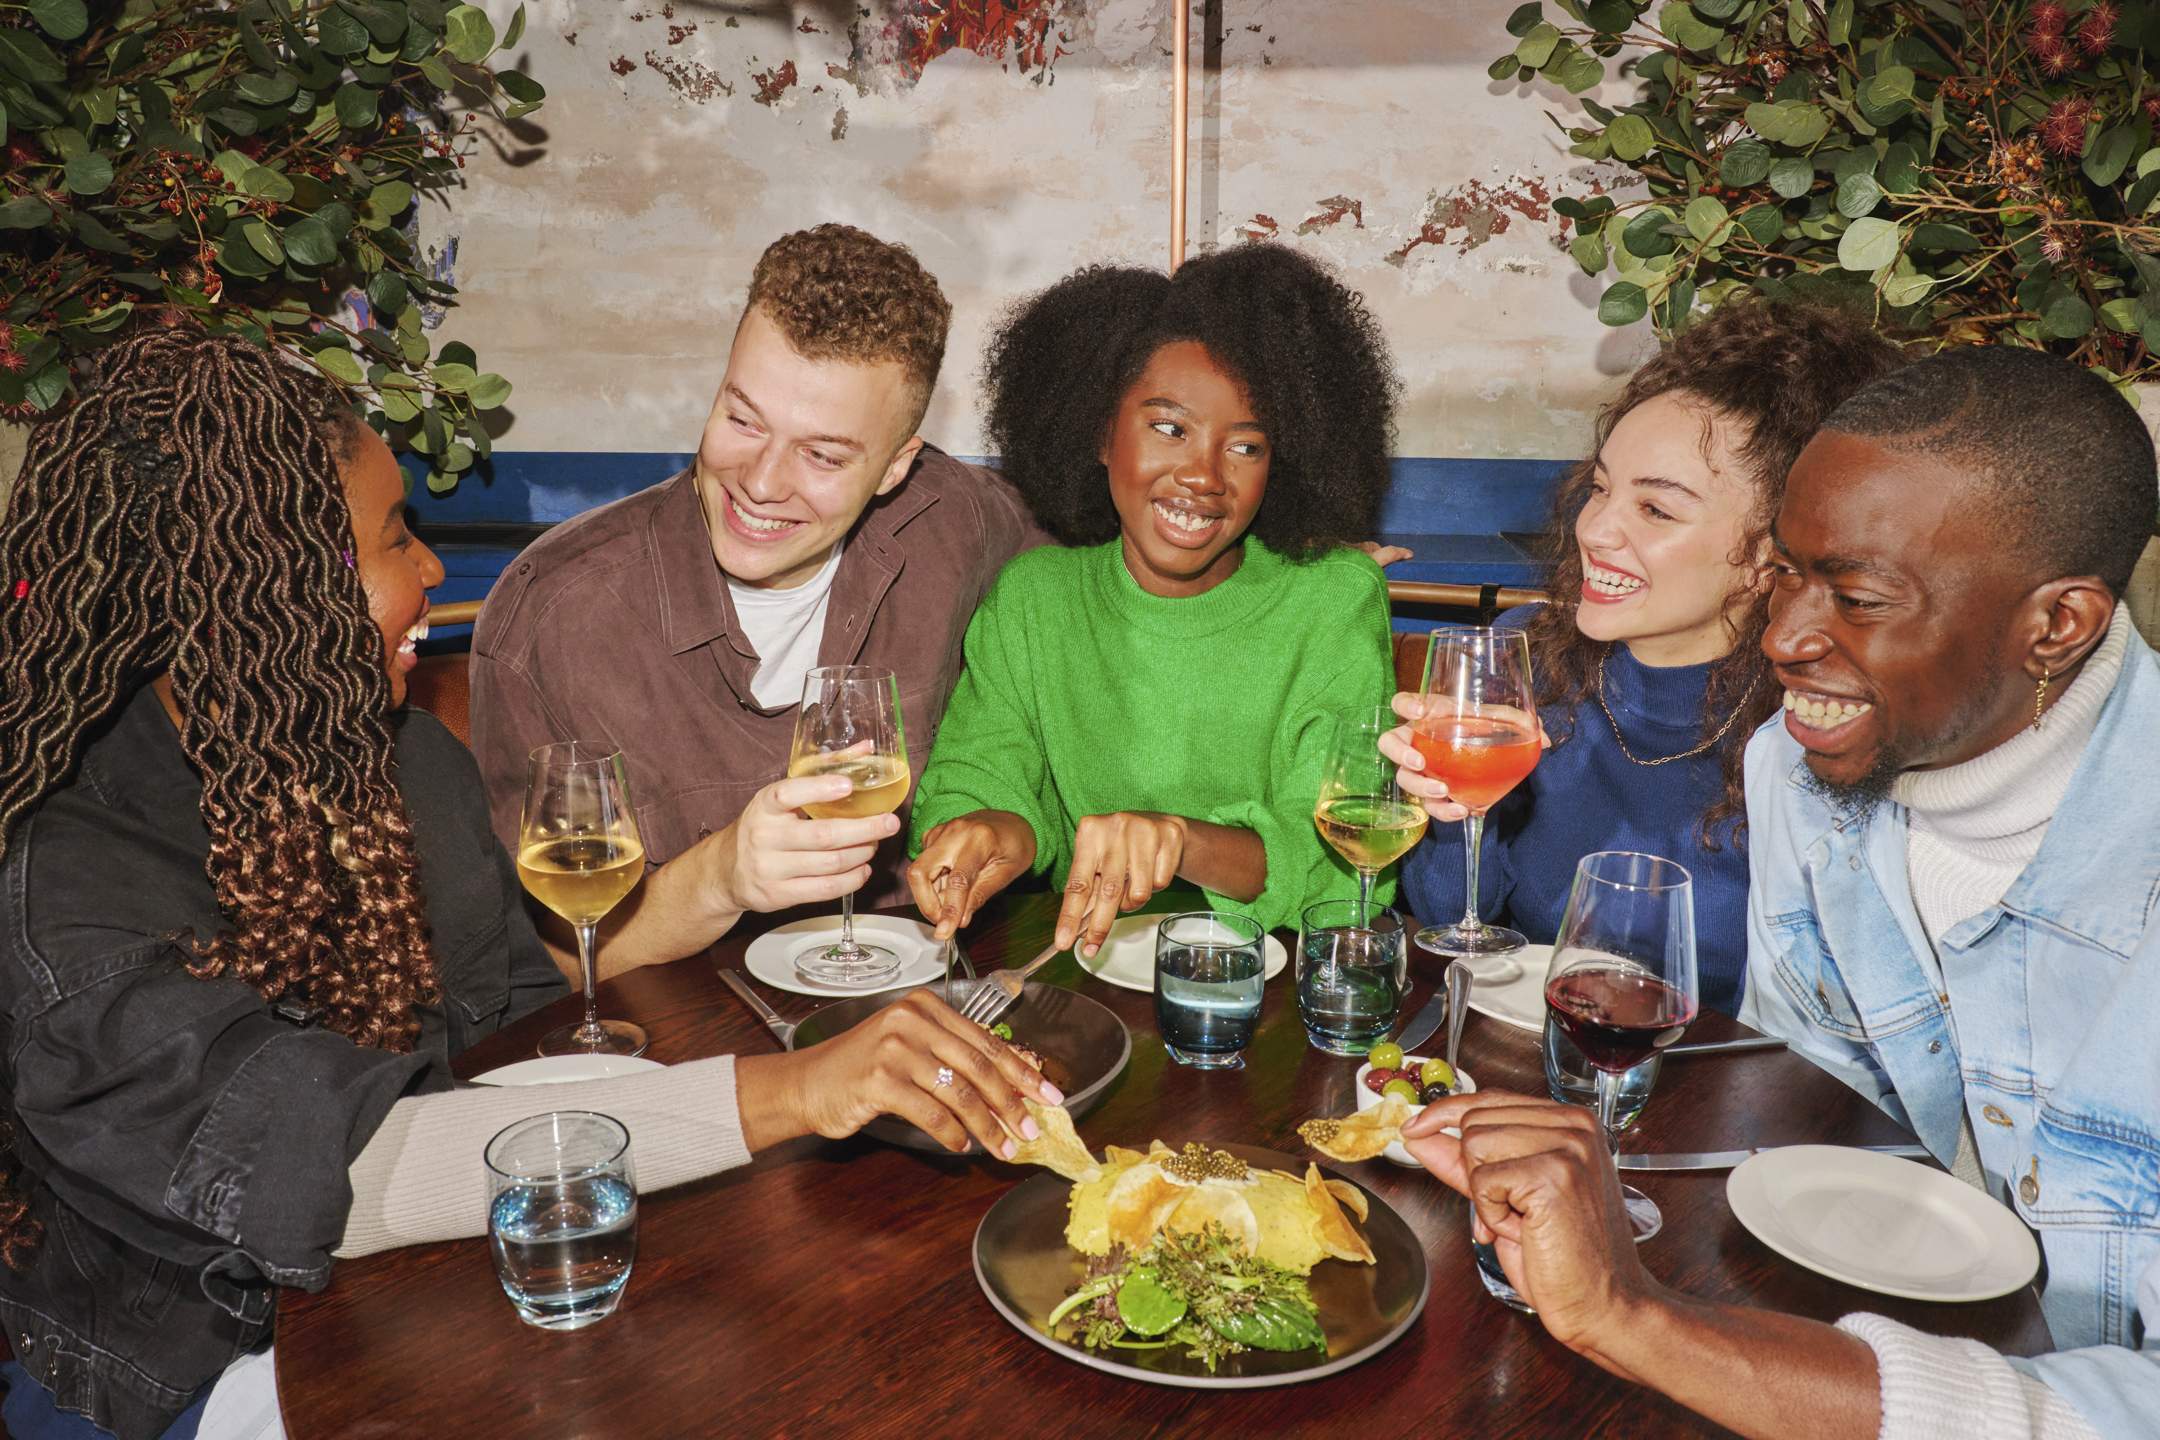 The image shows a group of customers sitting at a restaurant. The group is mixed in terms of gender and ethnicity, they are laughing and enjoying their meal.